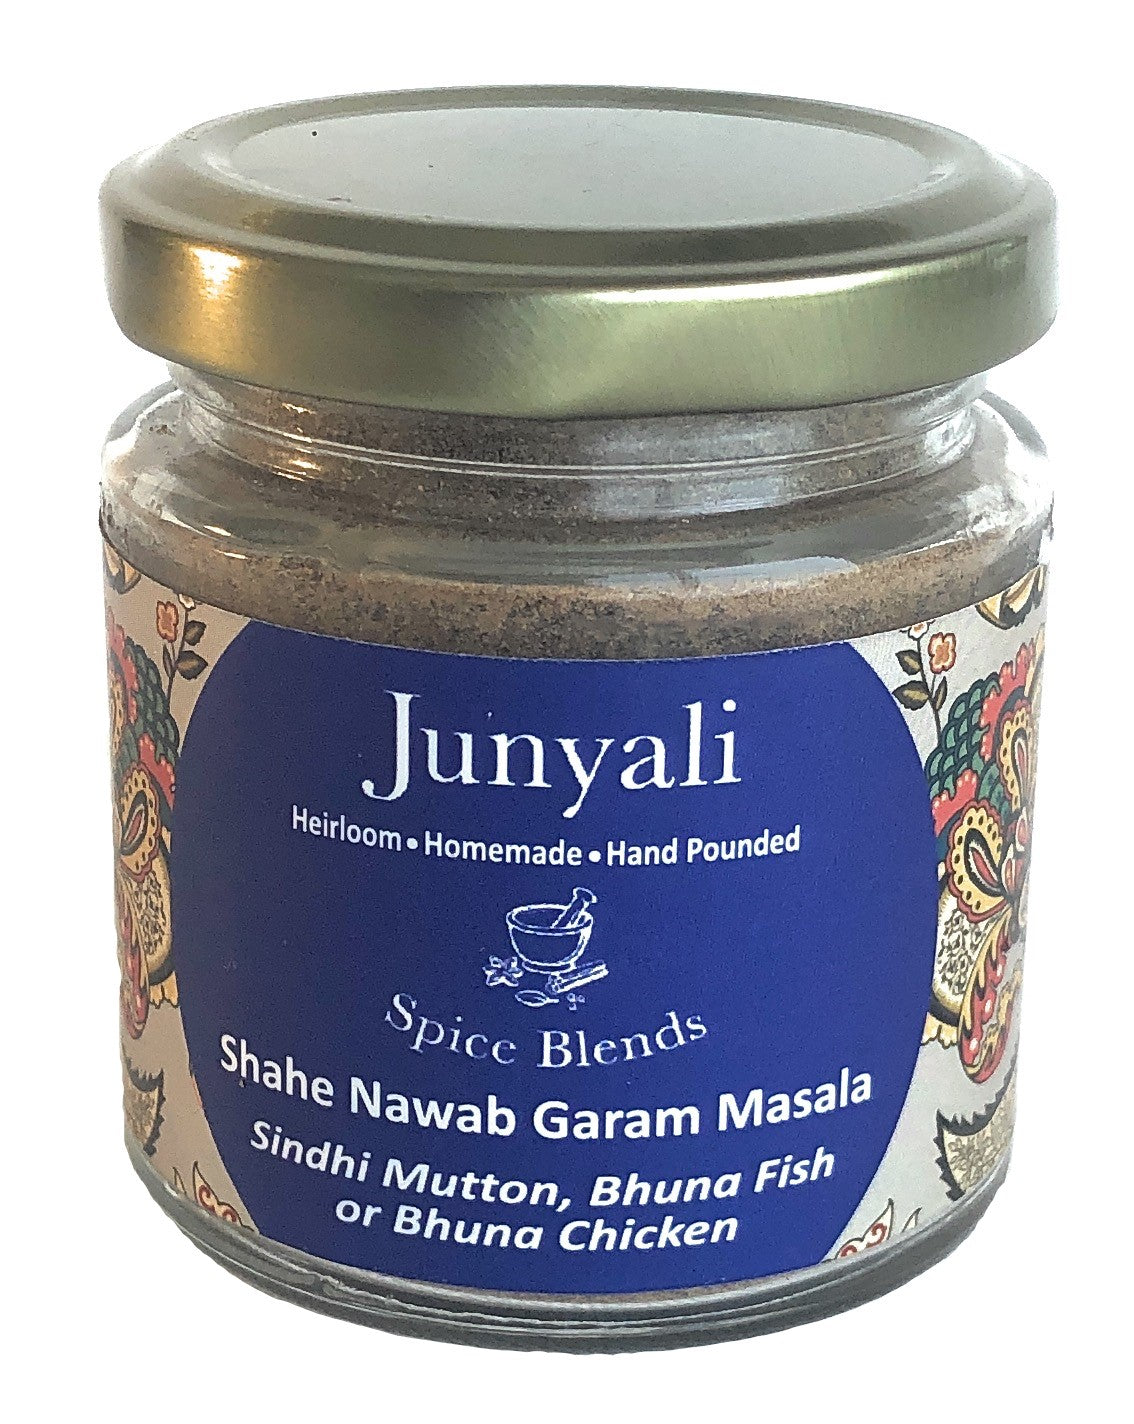 Gift Pack of Sindhi Spice Blends - Pack of 3